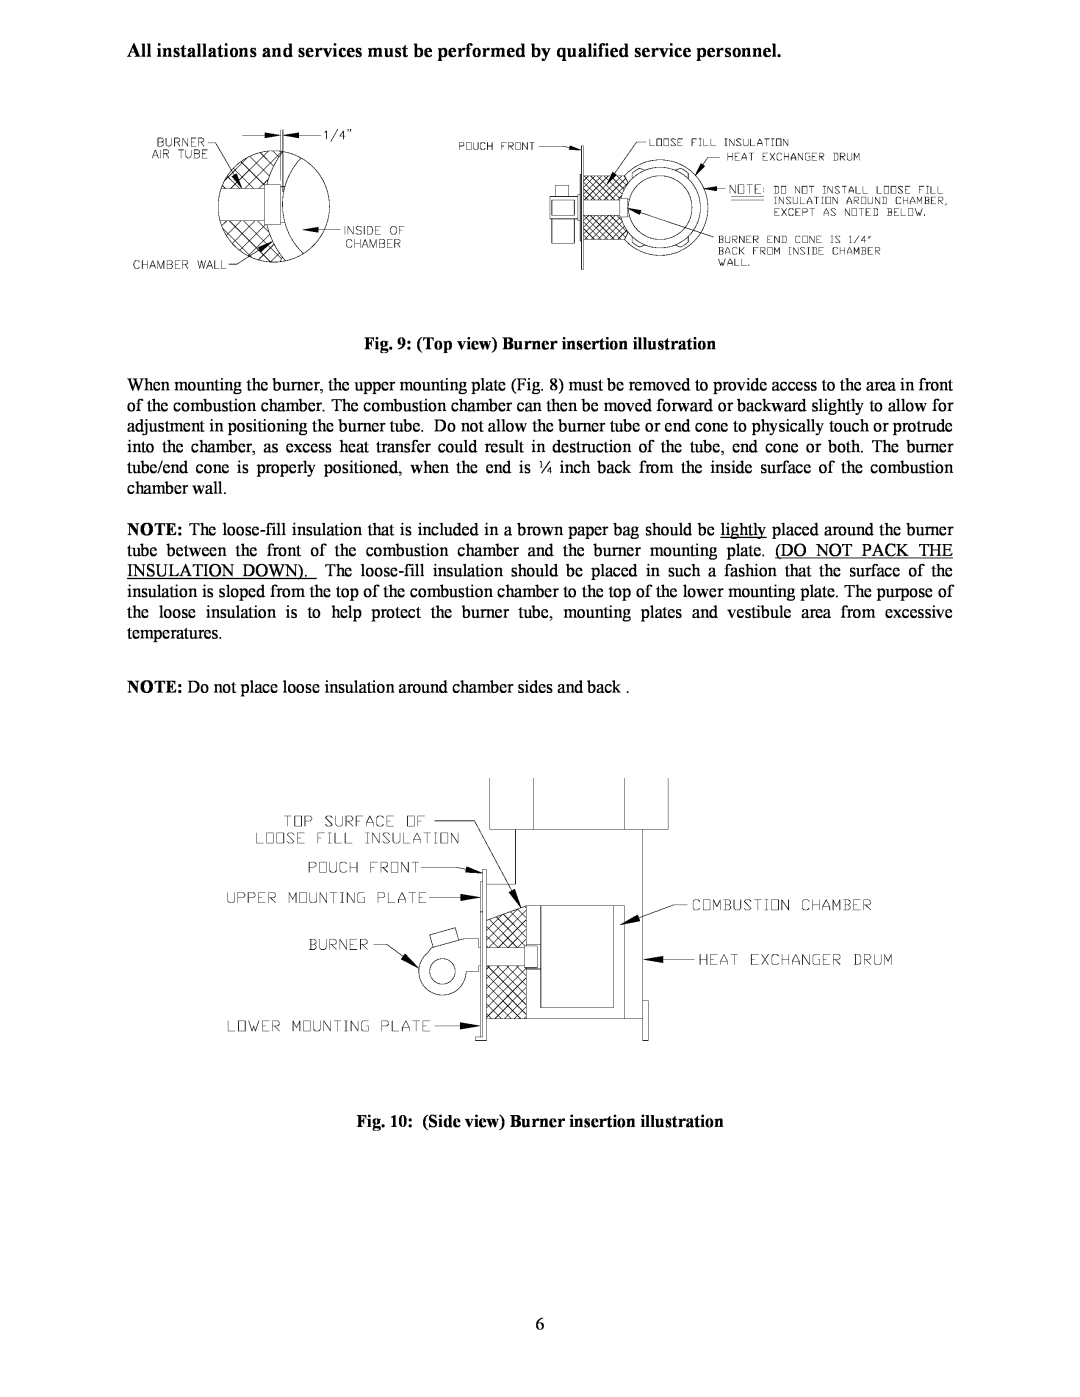 Thermo Products OH5-85DXE operation manual Top view Burner insertion illustration, Side view Burner insertion illustration 